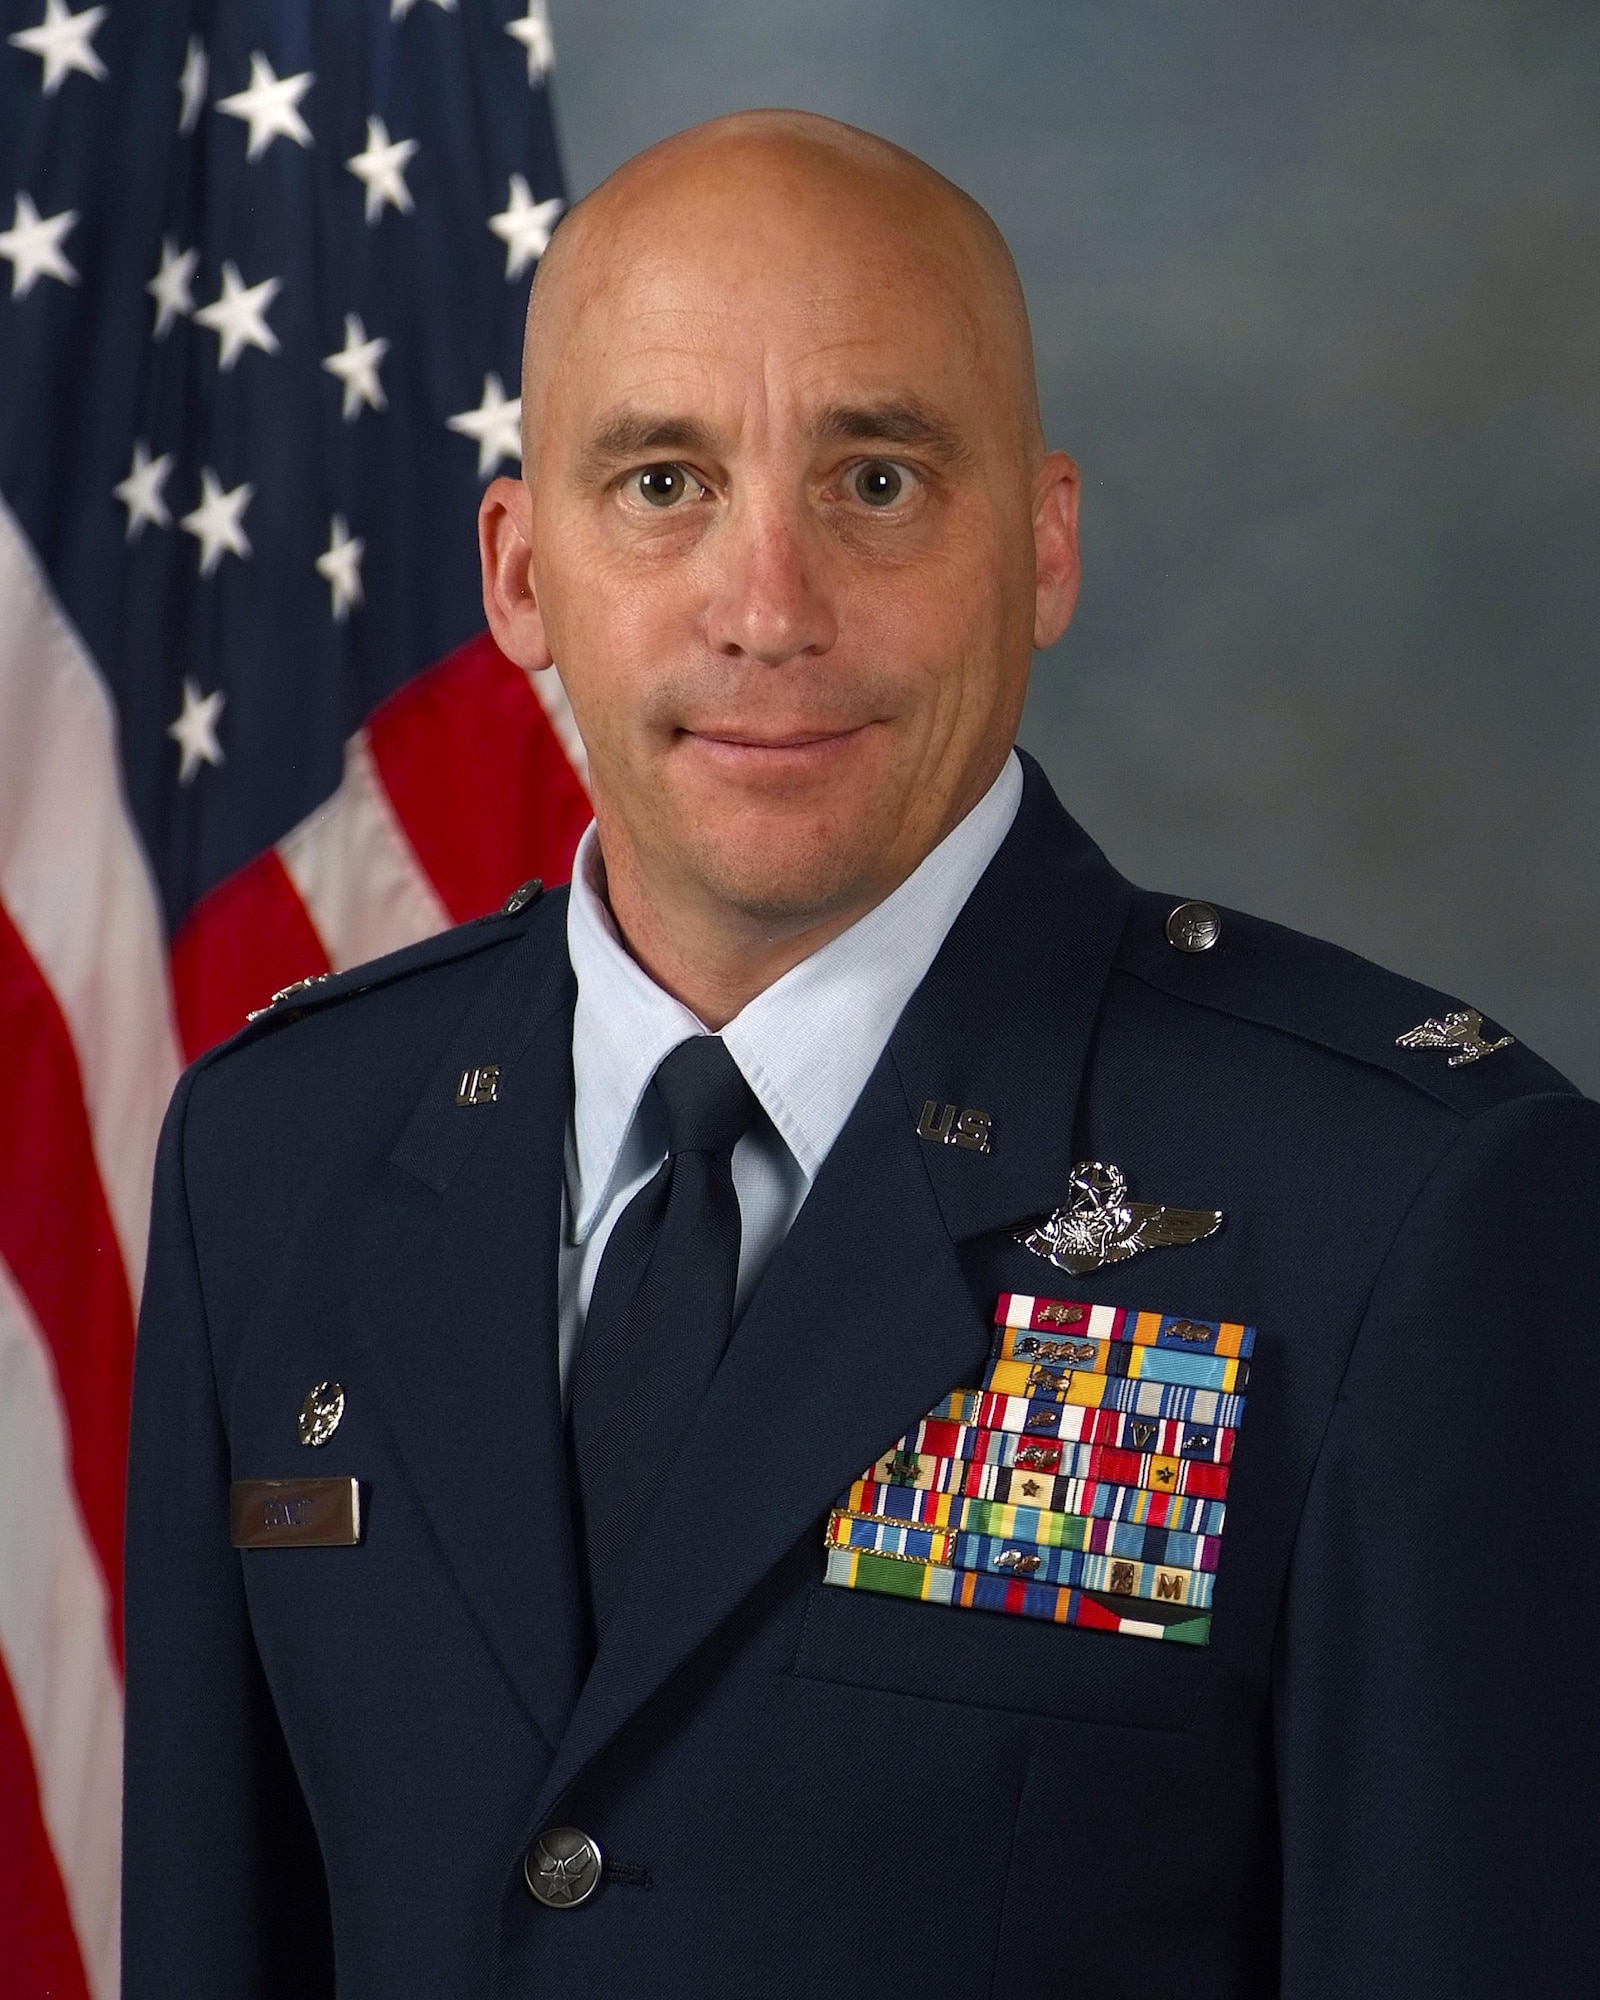 Colonel David J. Condit is the commander of the 908th Airlift Wing, Air Force Reserve Command, Maxwell Air Force Base, Ala. He commands more than 1,200 Airmen with a mission to provide unrivalled theater airlift and agile combat support across the spectrum of military operations. He is an Air Reserve Technician (ART), which is a full-time federal civil service employee serving in a selected position within a military unit. 